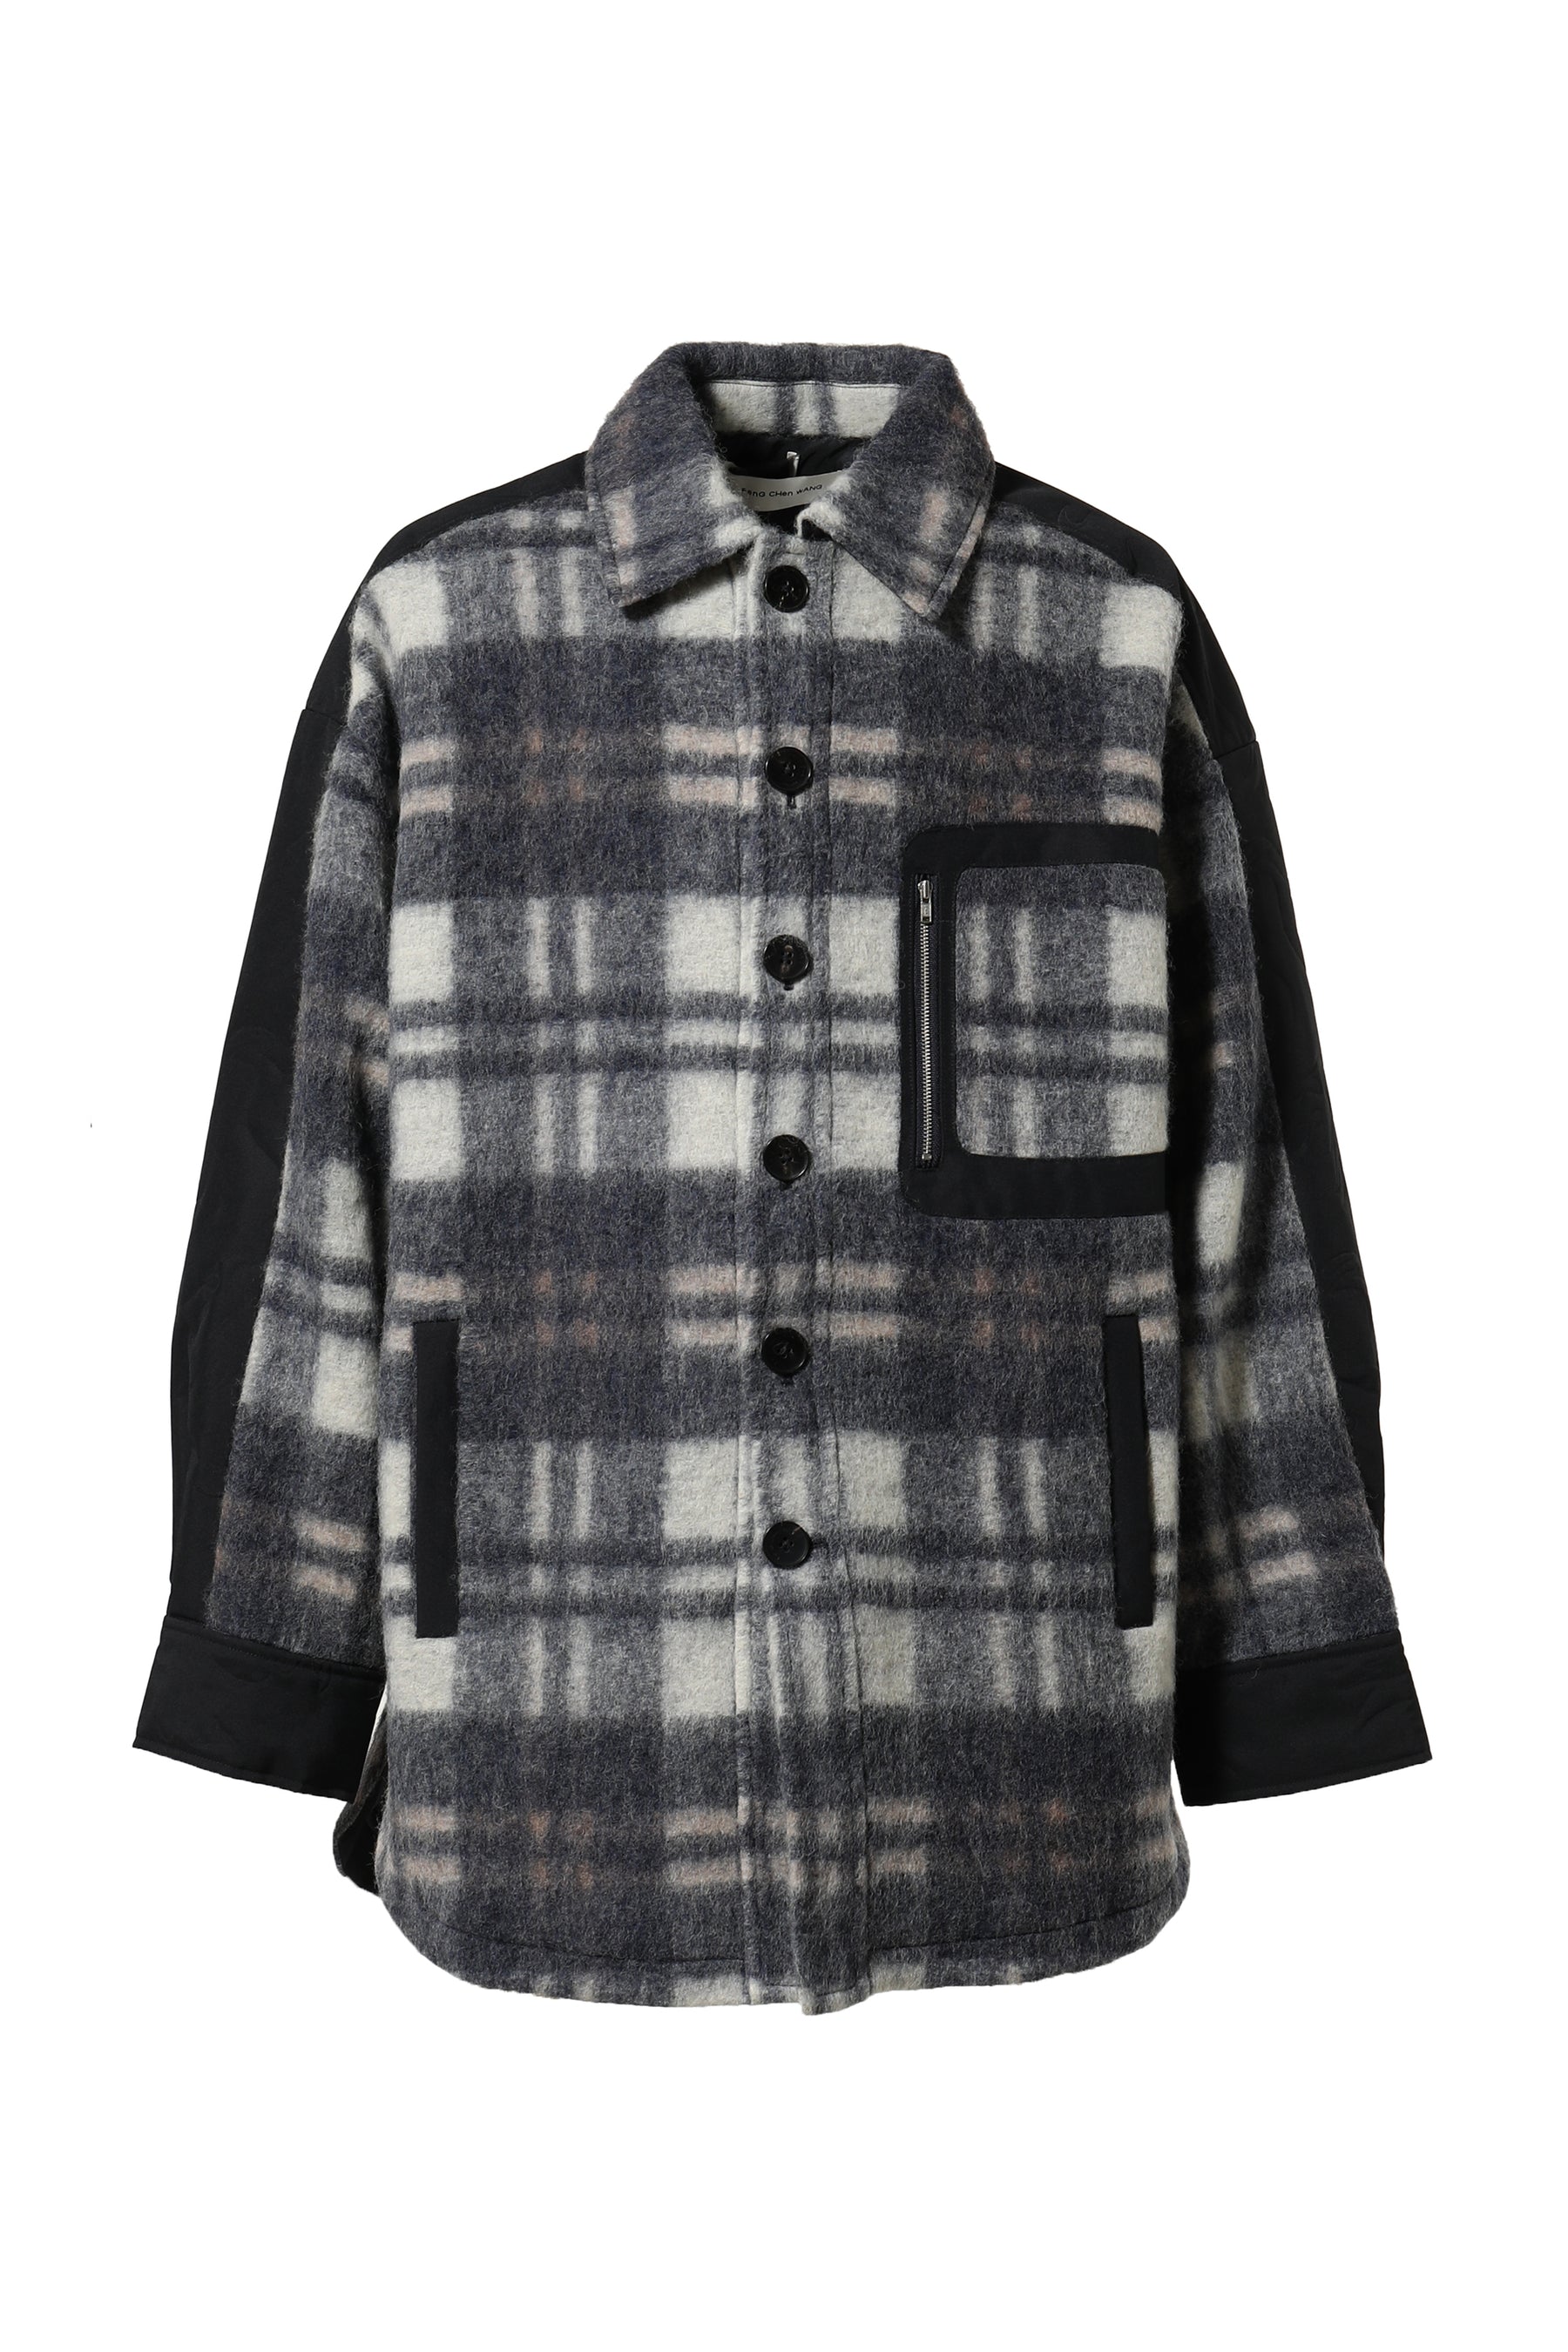 FenG CHen WANG フェンチェンワンFW23 FLANNEL SHIRT WITH QUILT